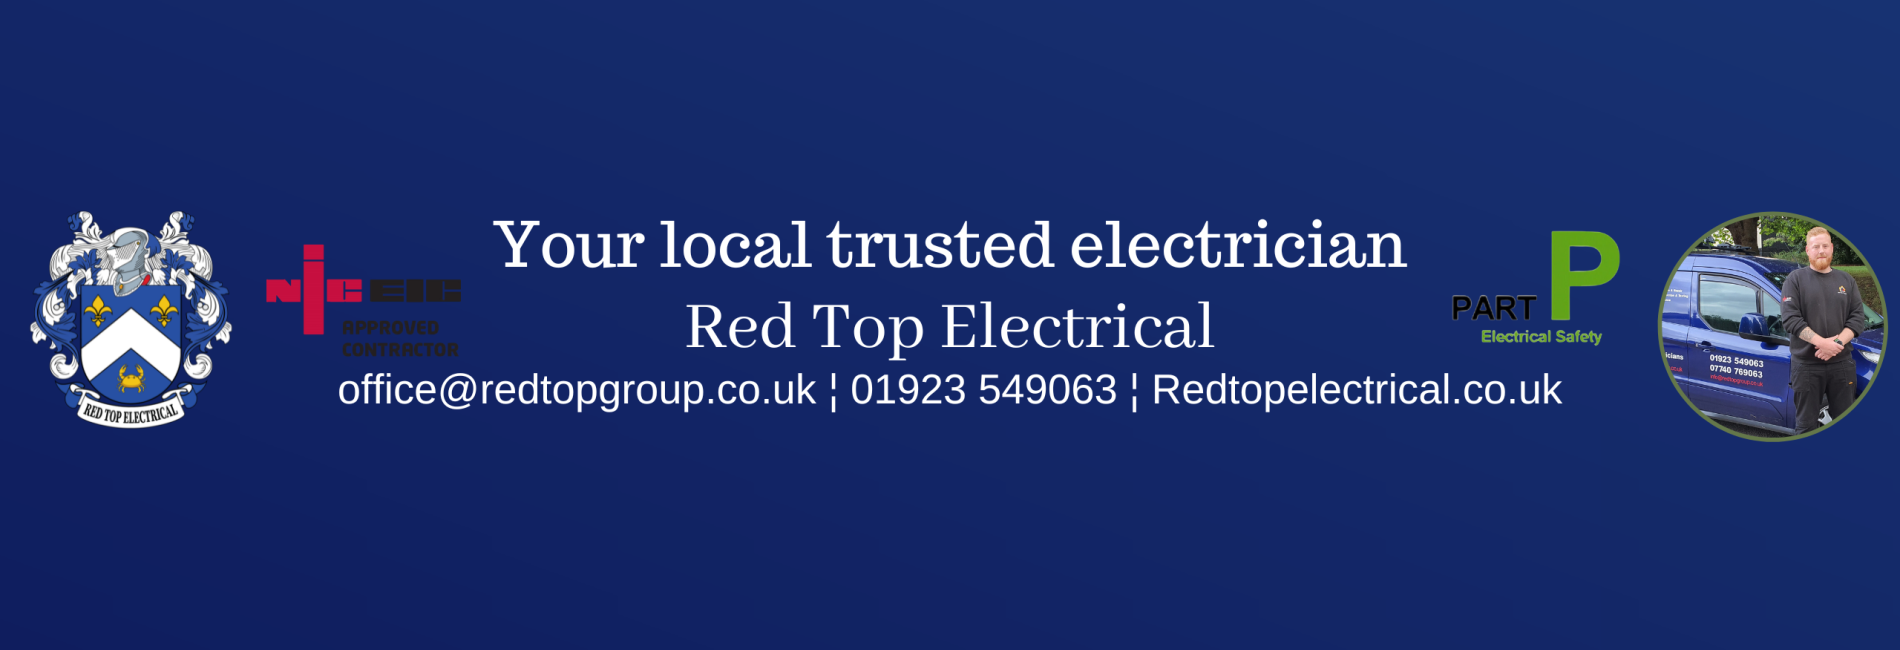 Red top electrical banner